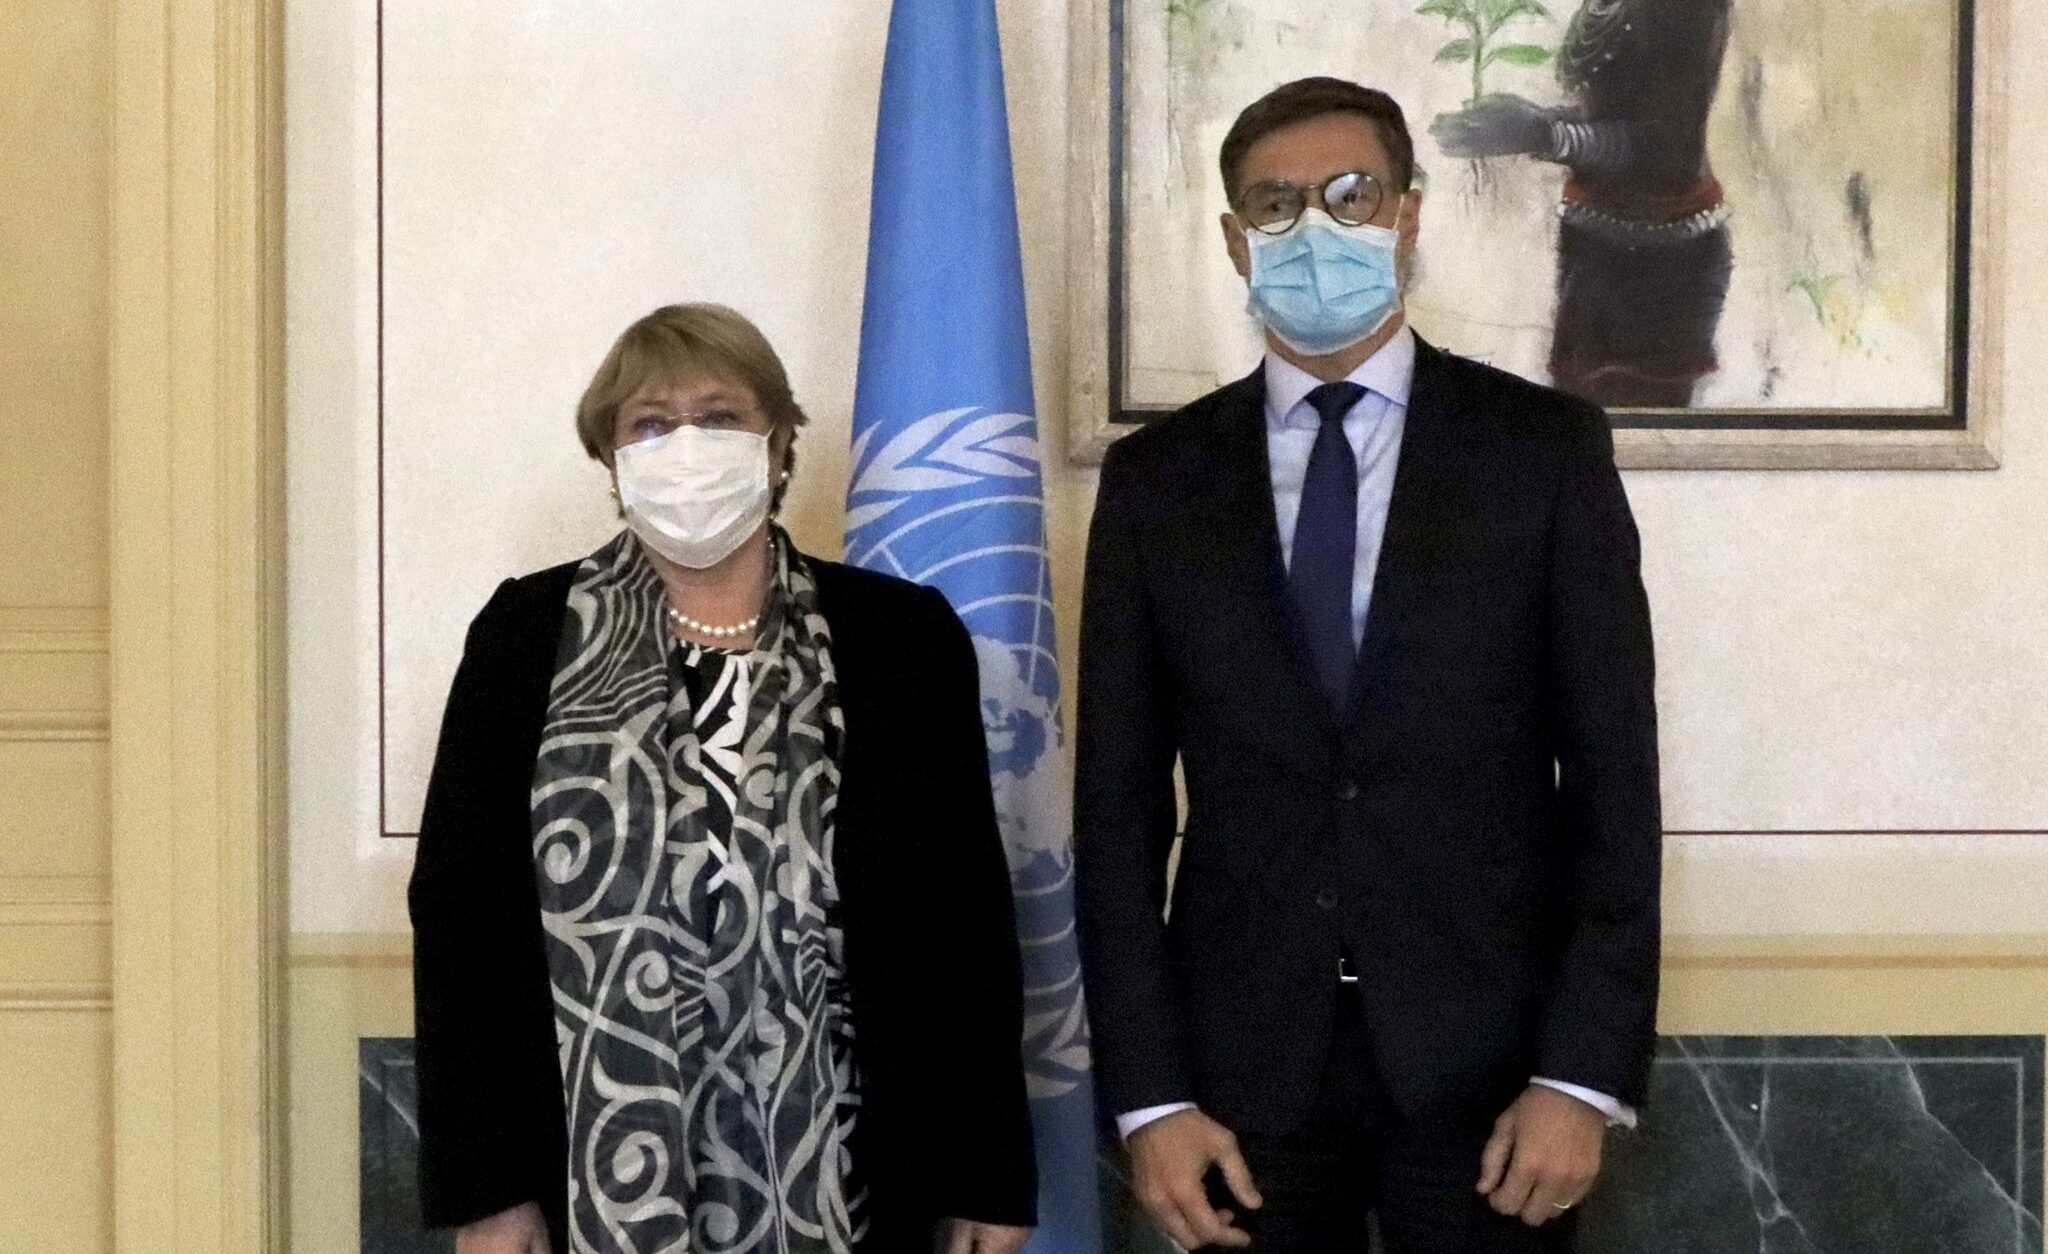 Venezuelan minister for foreign affairs Felix Plasencia meets in Brussels with the UN High Commissioner on Human Rights Michell Bachelet. Photo courtesy of Twitter / @PlasenciaFelix.